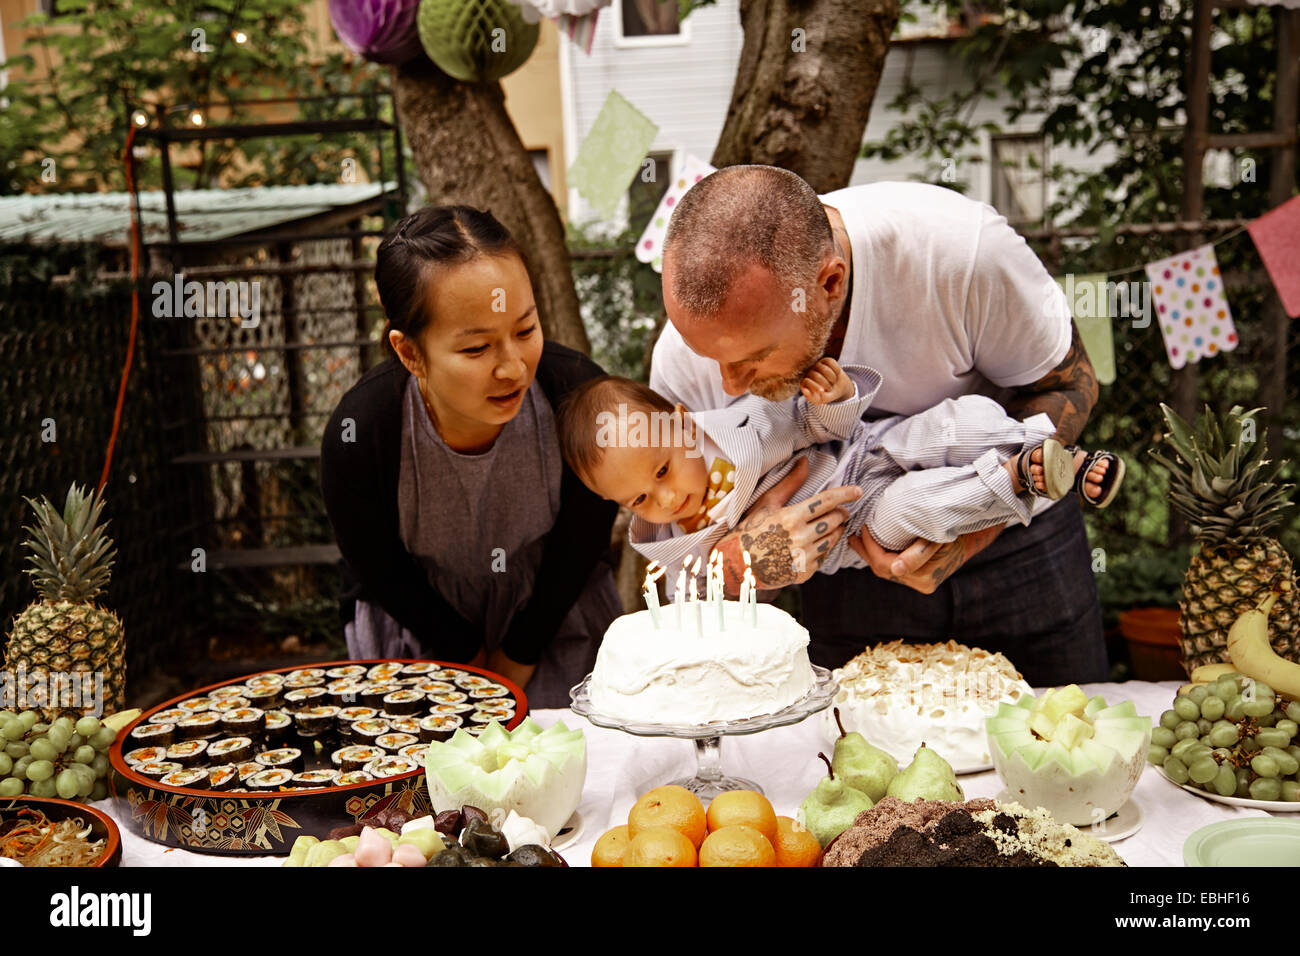 Parents and male toddler having birthday party in garden Stock Photo